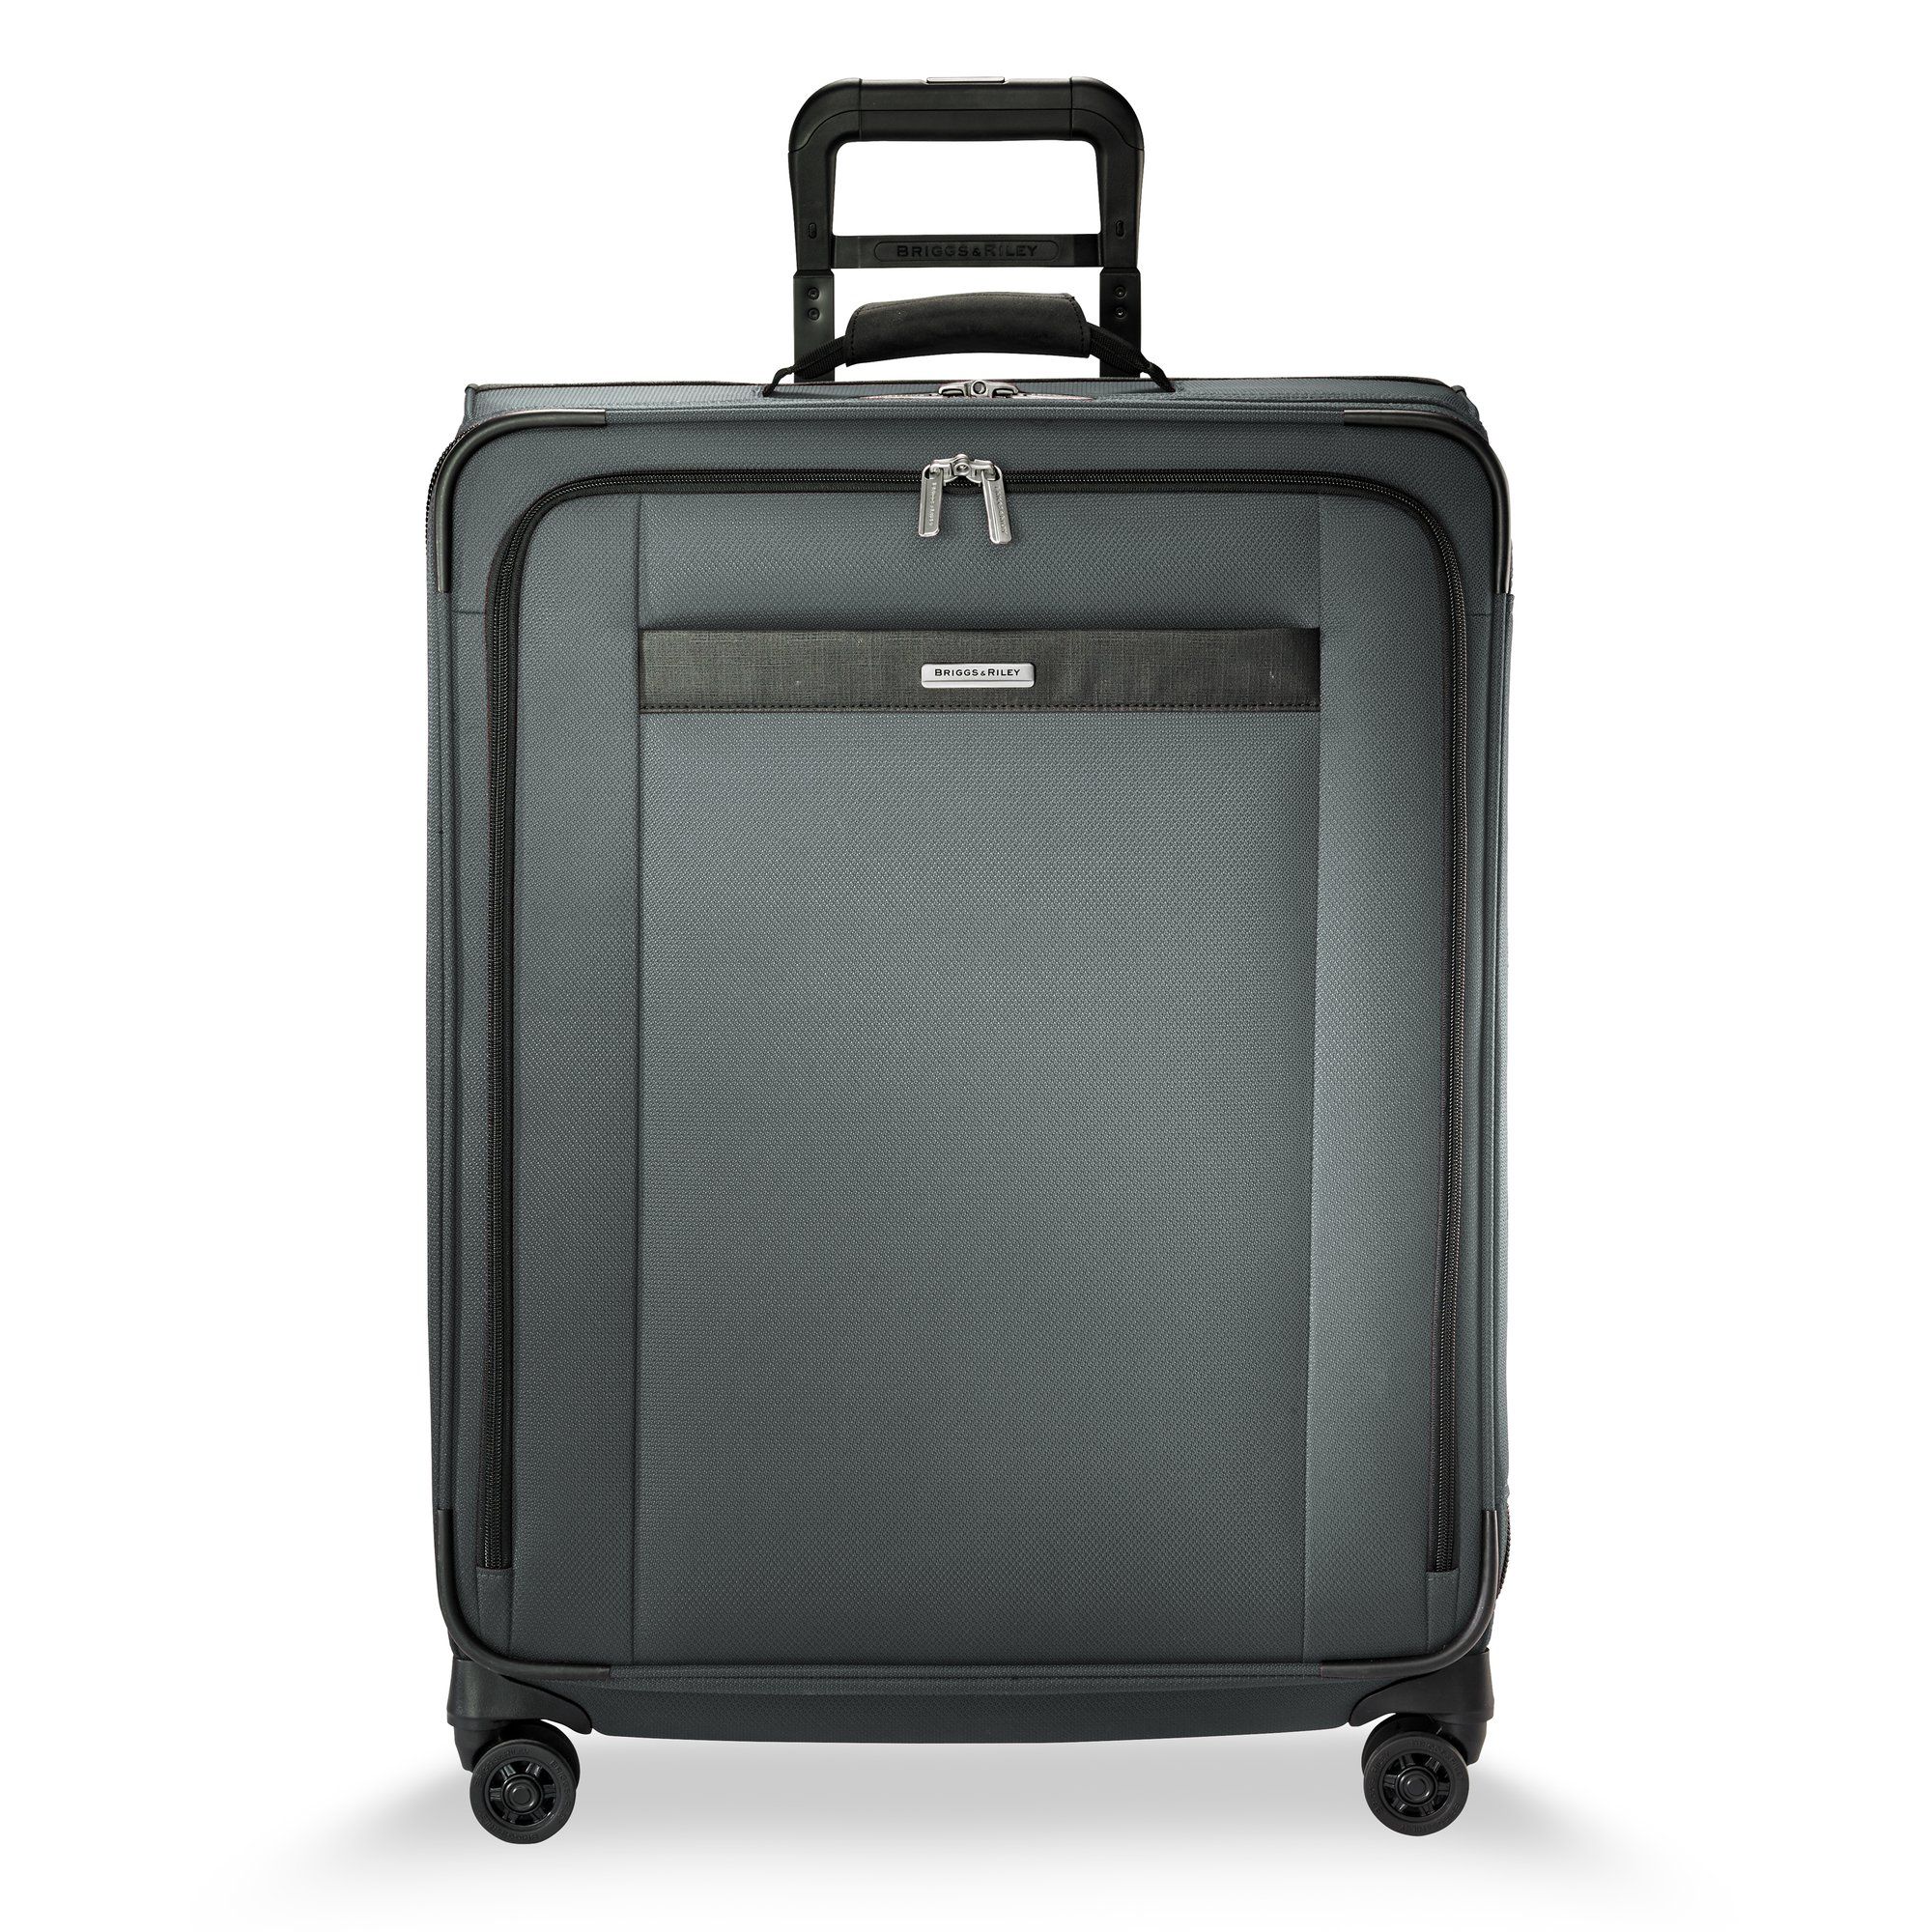 Meet the best of both worlds.  The Transcend Medium Expandable Spinner is large enough to store extra clothing and essentials, but still light enough to not slow you down.  Four spinner wheels transport you effortlessly across the airport and around the world.  VX™ veratile expansion allows up to an extra 6cm of customisable capacity and ensures a sturdy shape for easy packing. Lightweight hybrid fiberglass frame provides flexibility, durability and shape retention. Outsider® handle for wrinkle-free flat packing provides greater interior capacity and increased packing space. SmartLink™ system strap transports two or more bags as one. Large, gusseted u-zip front compartment has a wide opening for hassle-free access to extra items like a jacket or sweater. VX™ variable expansion system allows for easily customisable capacity (up to 6cm of extra packing space) and ensures bag will retain its structure and shape while you pack and travel. Built-in garment folder with removable, adjustable foam roll bar neatly holds 2 suits or garments or 1-4 shirts and cinches them securely in place to prevent wrinkling.